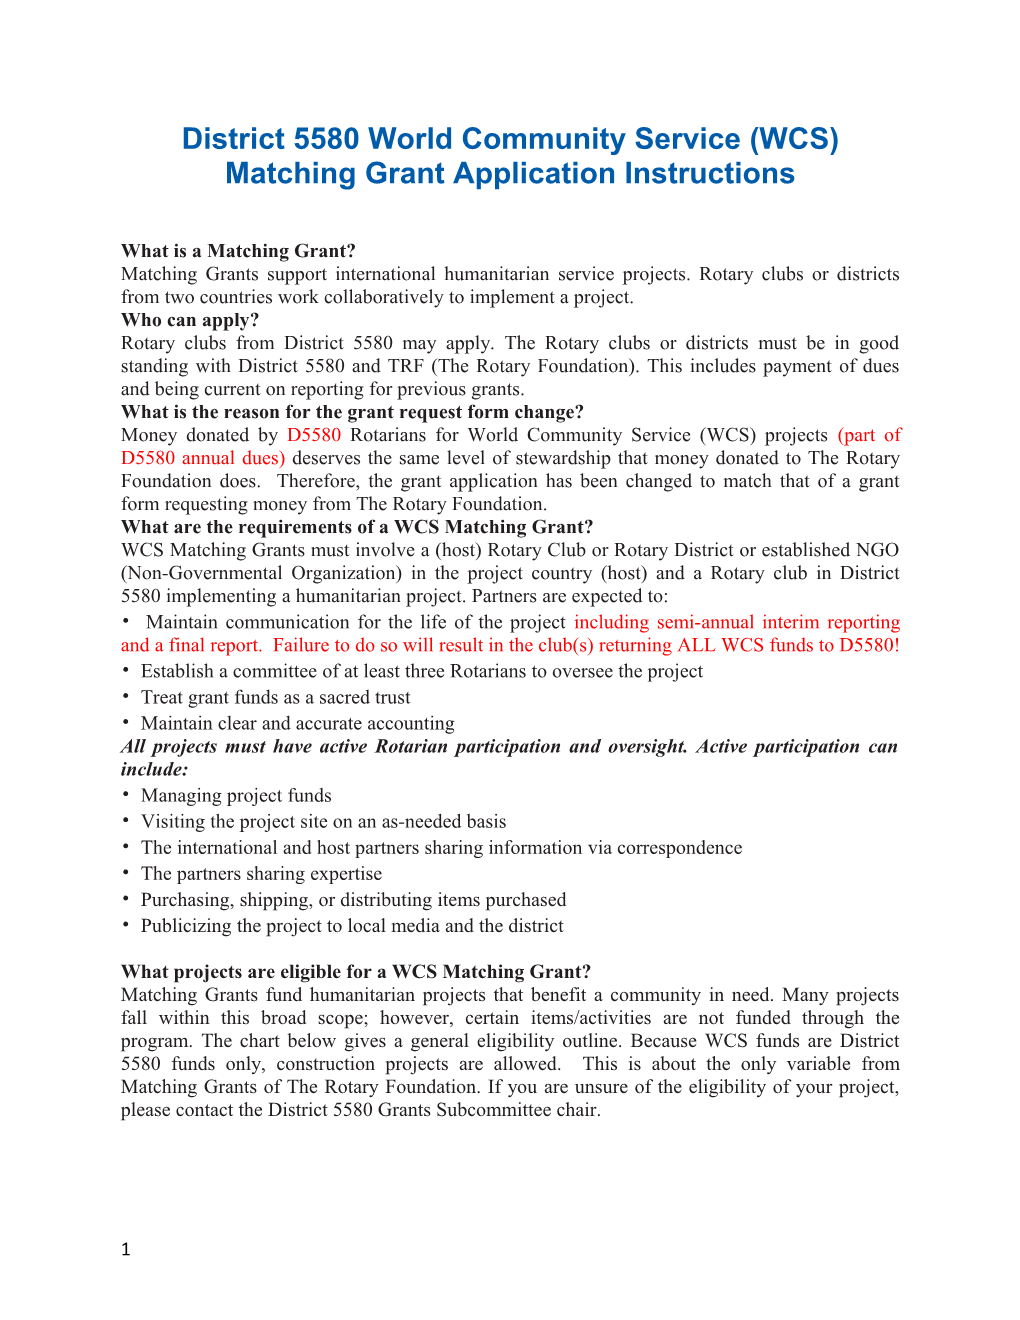 District 5580 World Community Service (WCS) Matching Grant Application Instructions